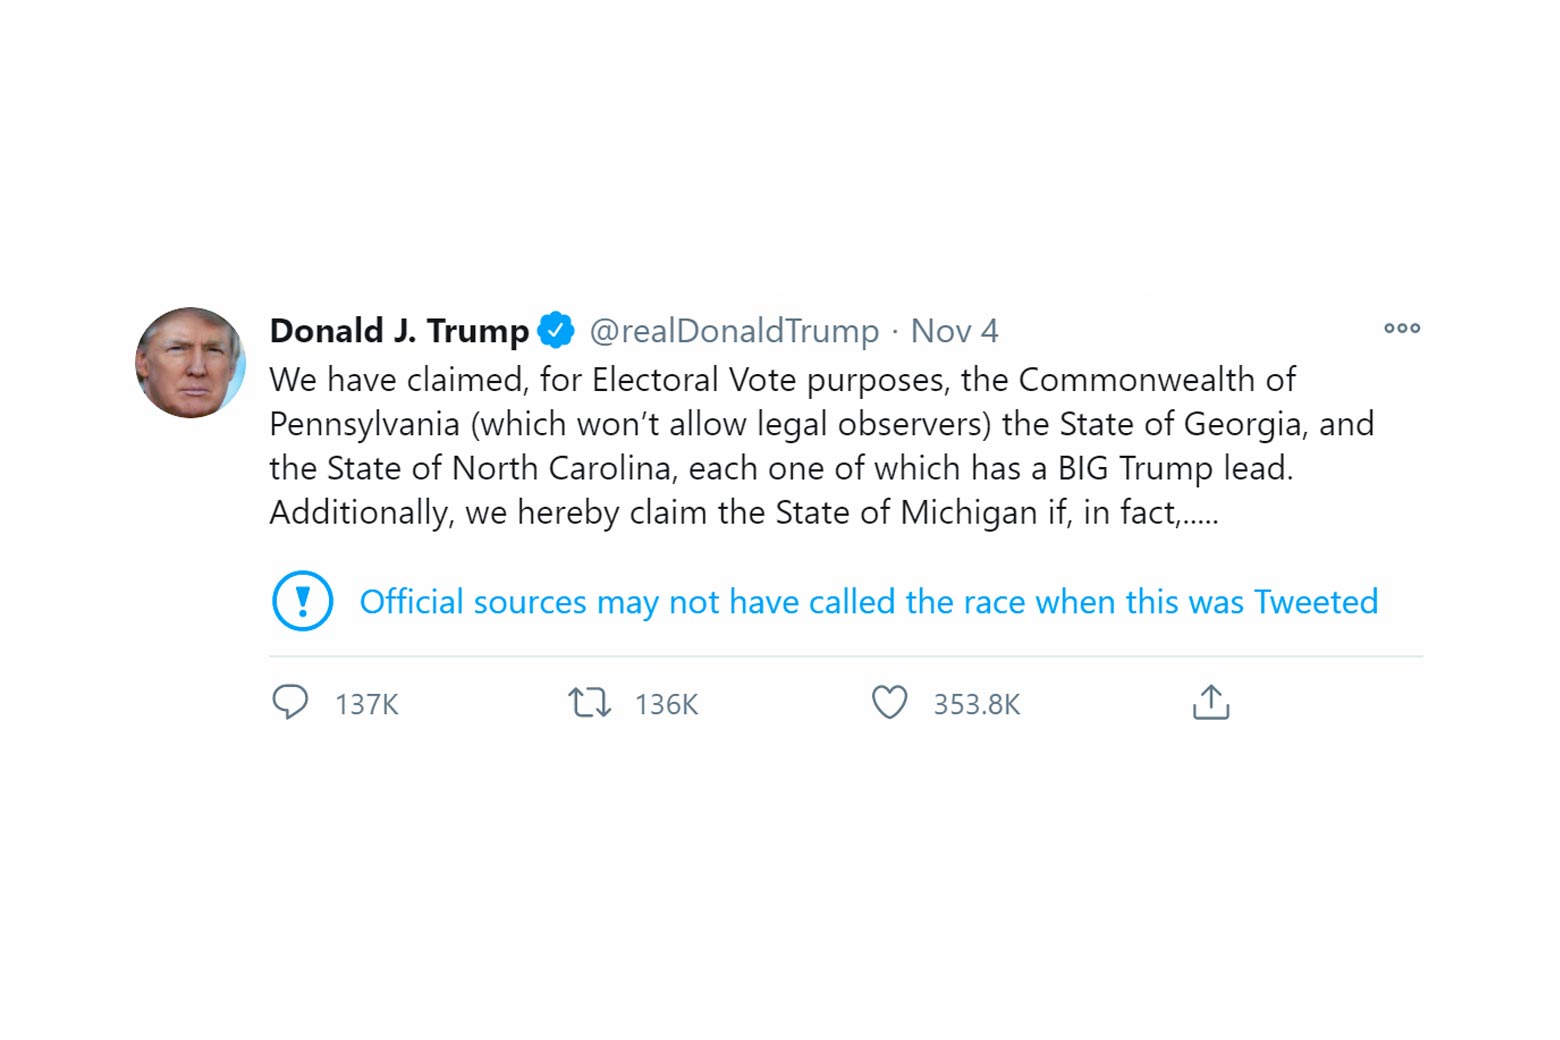 Trump tweet claiming victory in Pennsylvania, Georgia, and North Carolina, with a Twitter label underneath that says “Official sources may not have called the race when this was Tweeted”